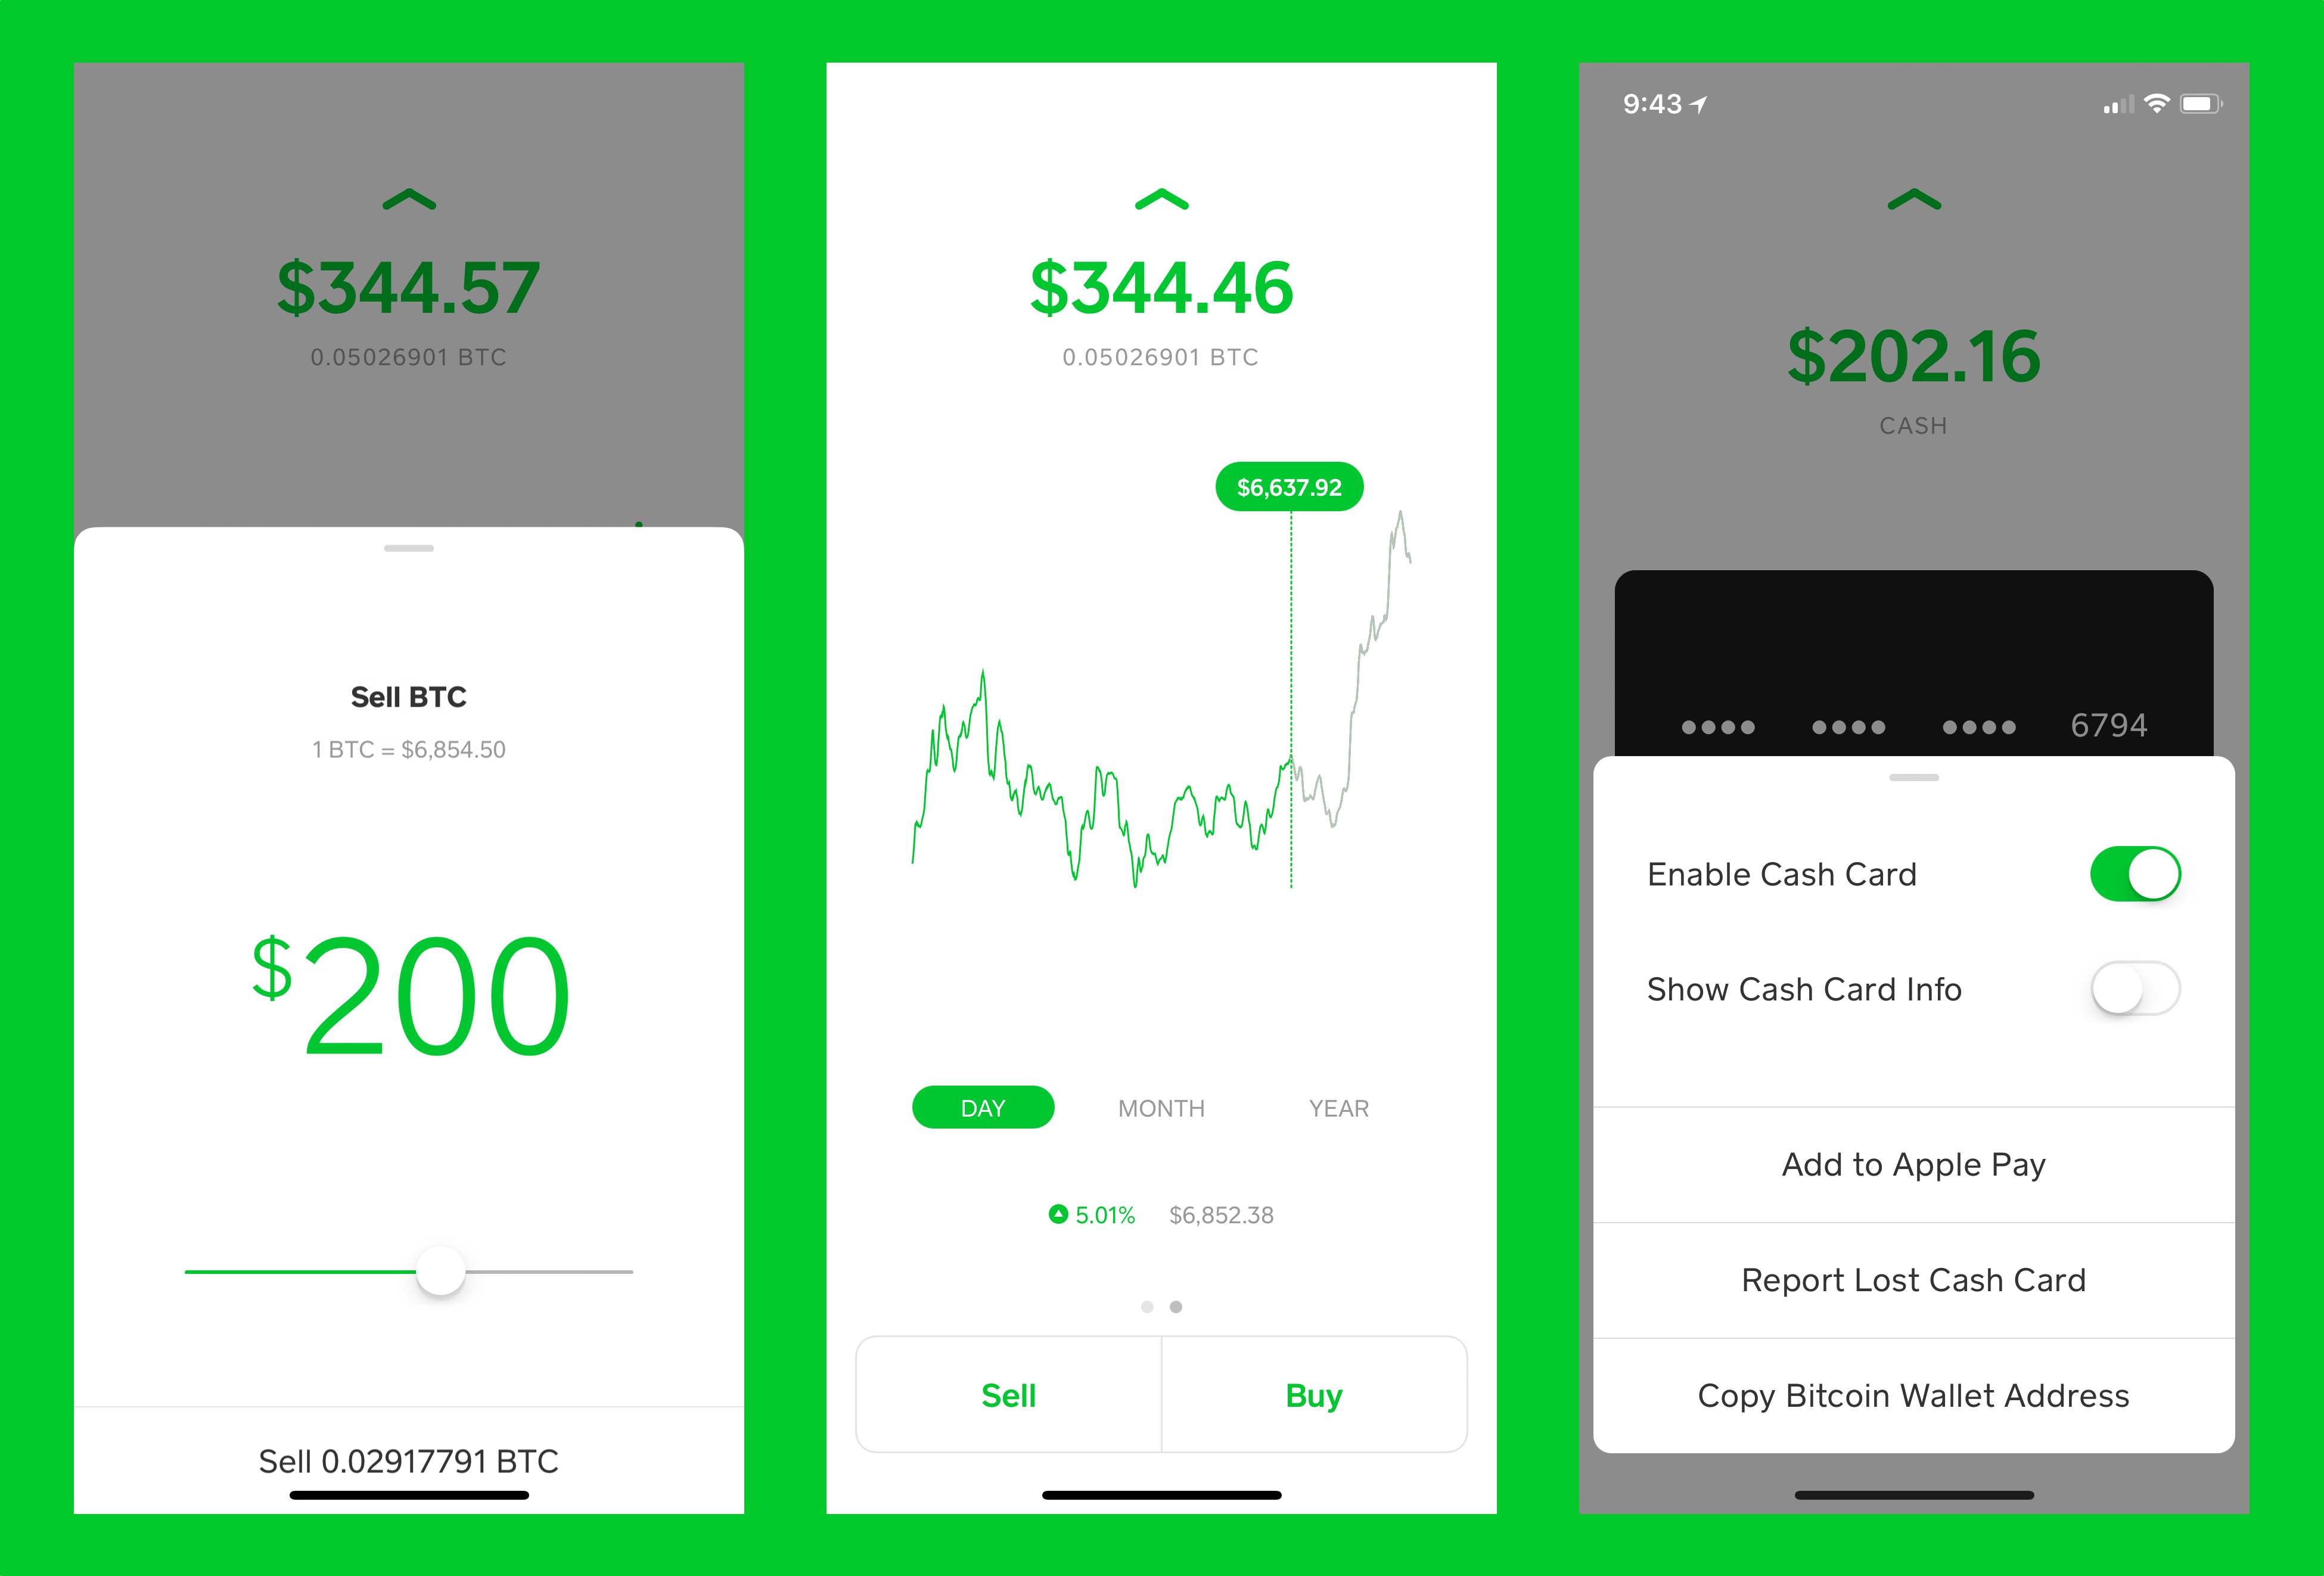 Square Cash is letting some users buy and sell Bitcoin